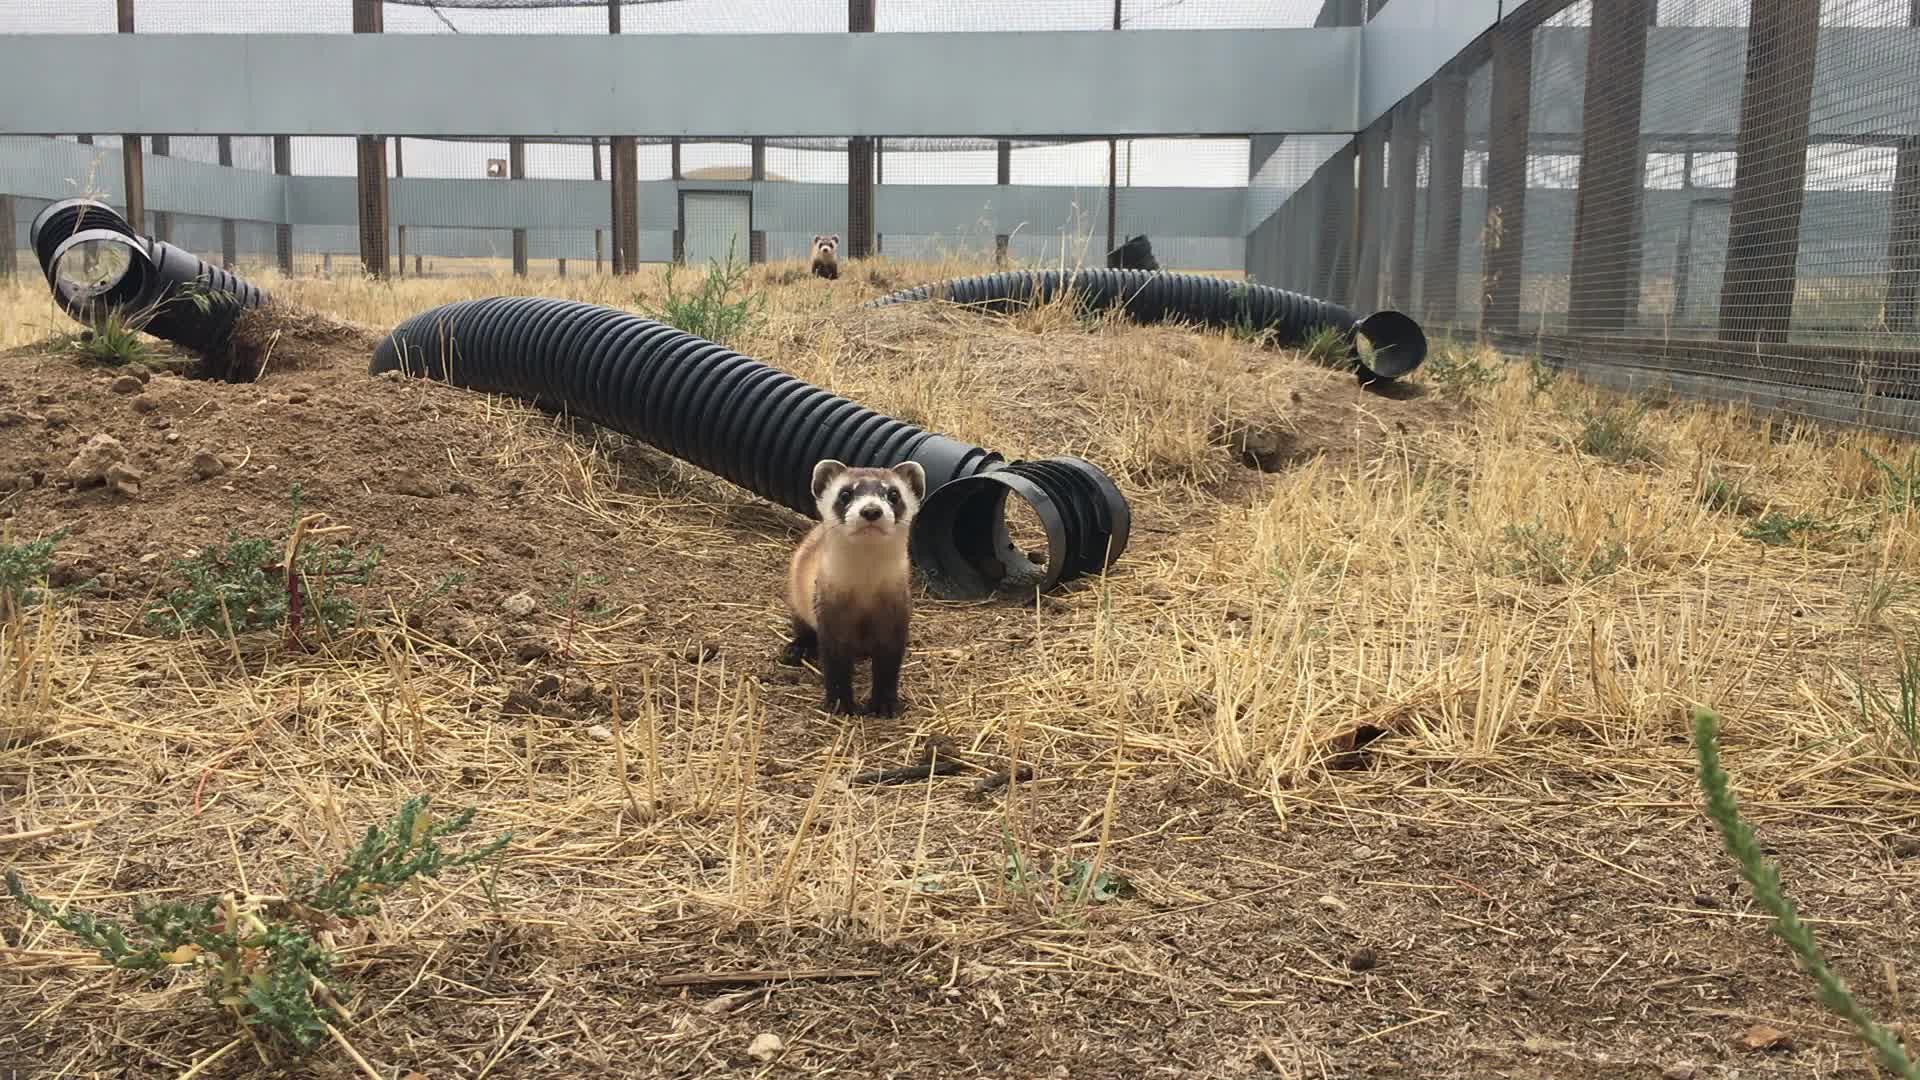 Black-footed ferrets playing at the National Black-footed Ferret Conservation Center